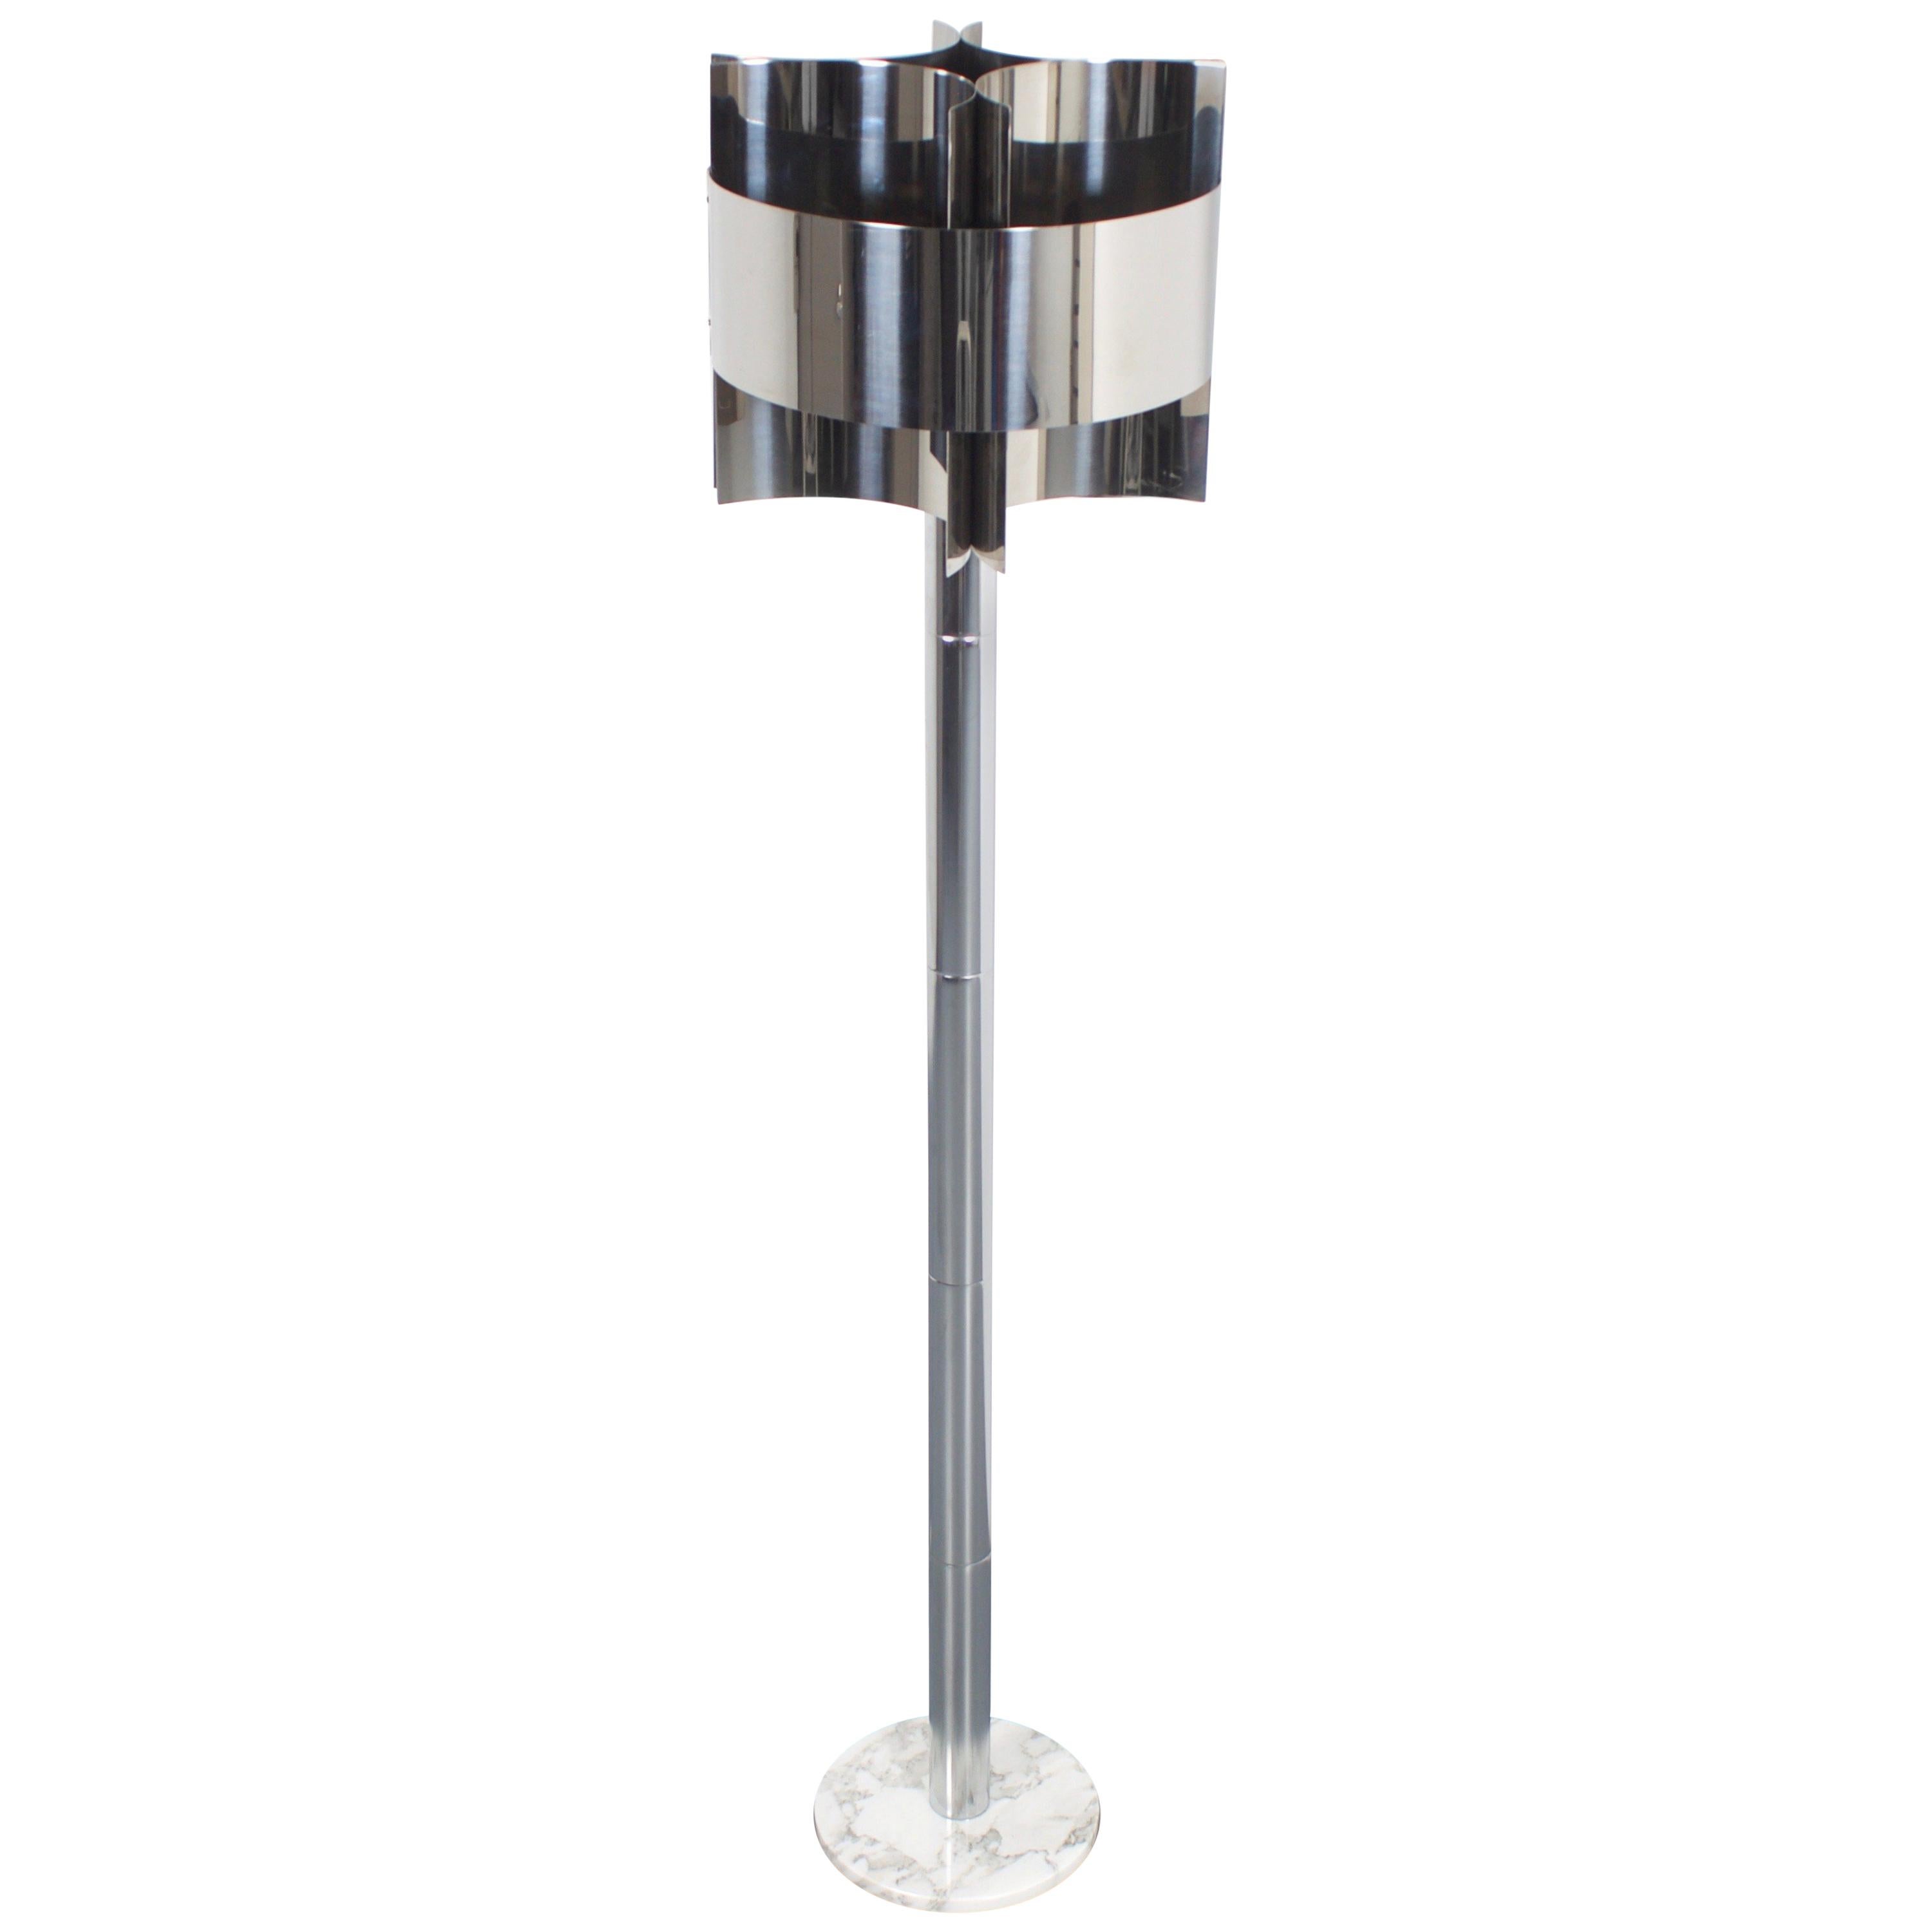 1970s Chrome and Marble Floor Lamp Attributed to Pierre Cardin For Sale